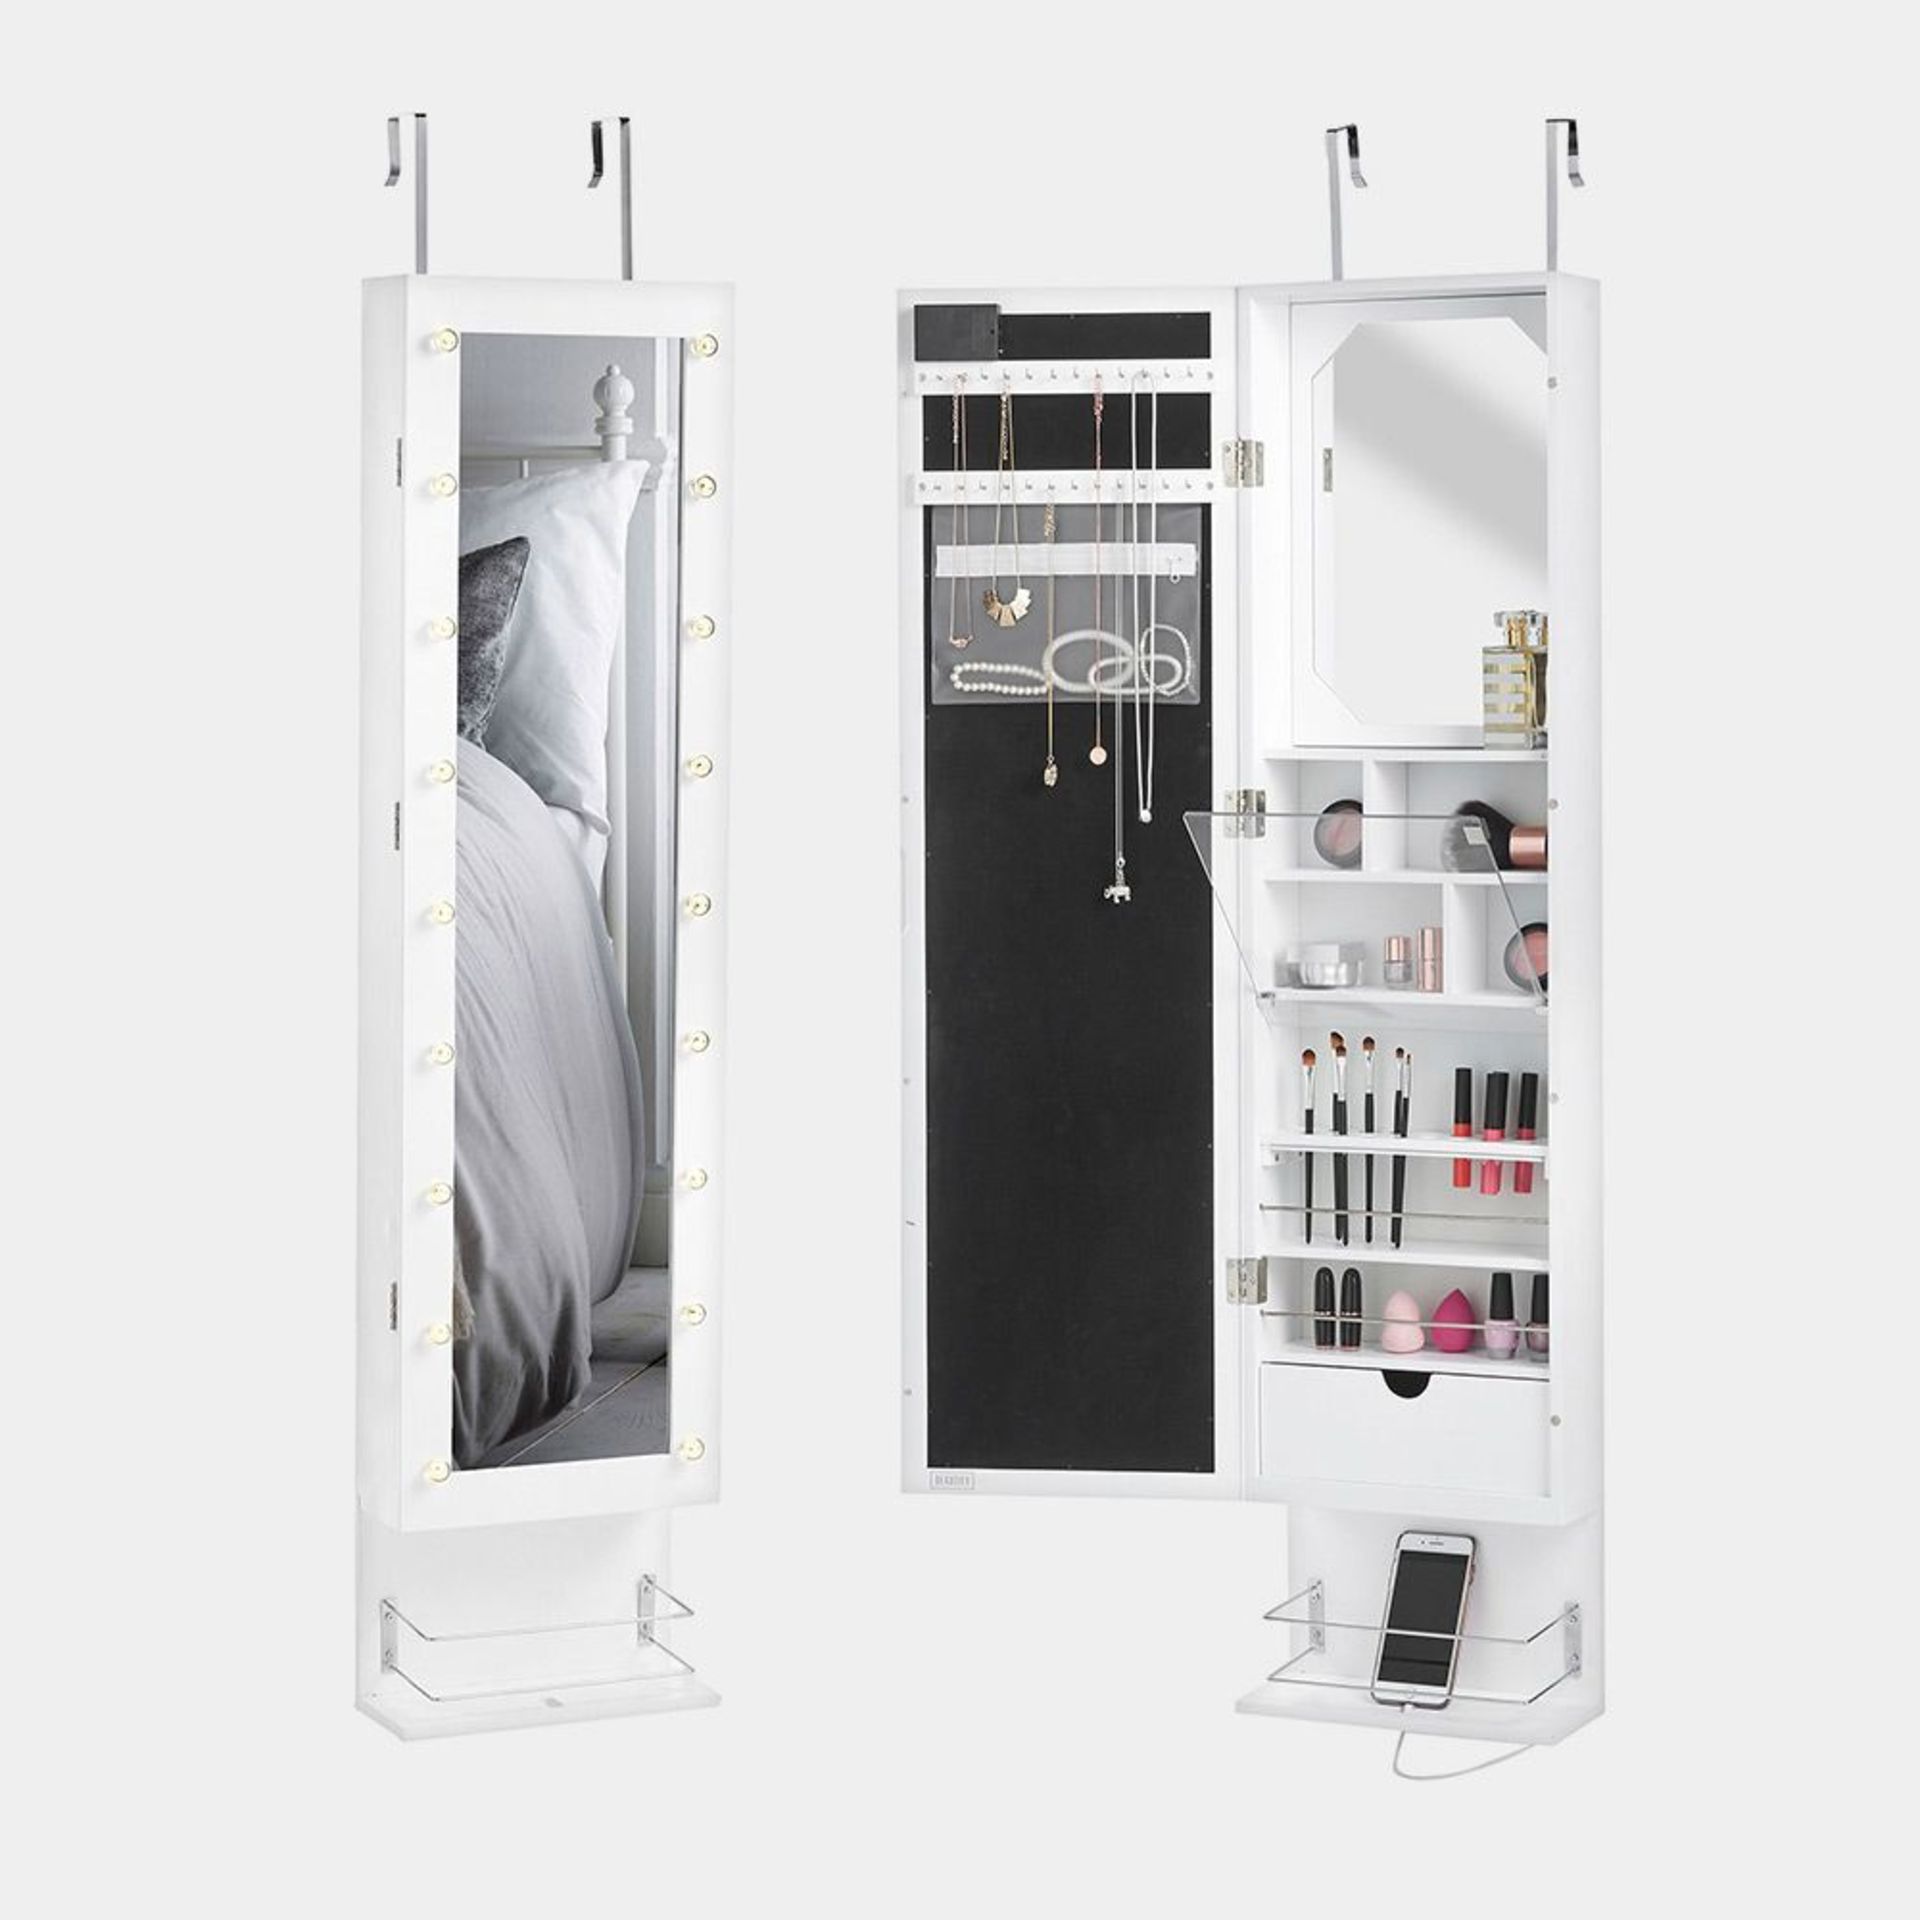 LED Wall Mounted Storage Armoire Mirror. - BI. Inspired by Hollywood glamour, the storage cabinet